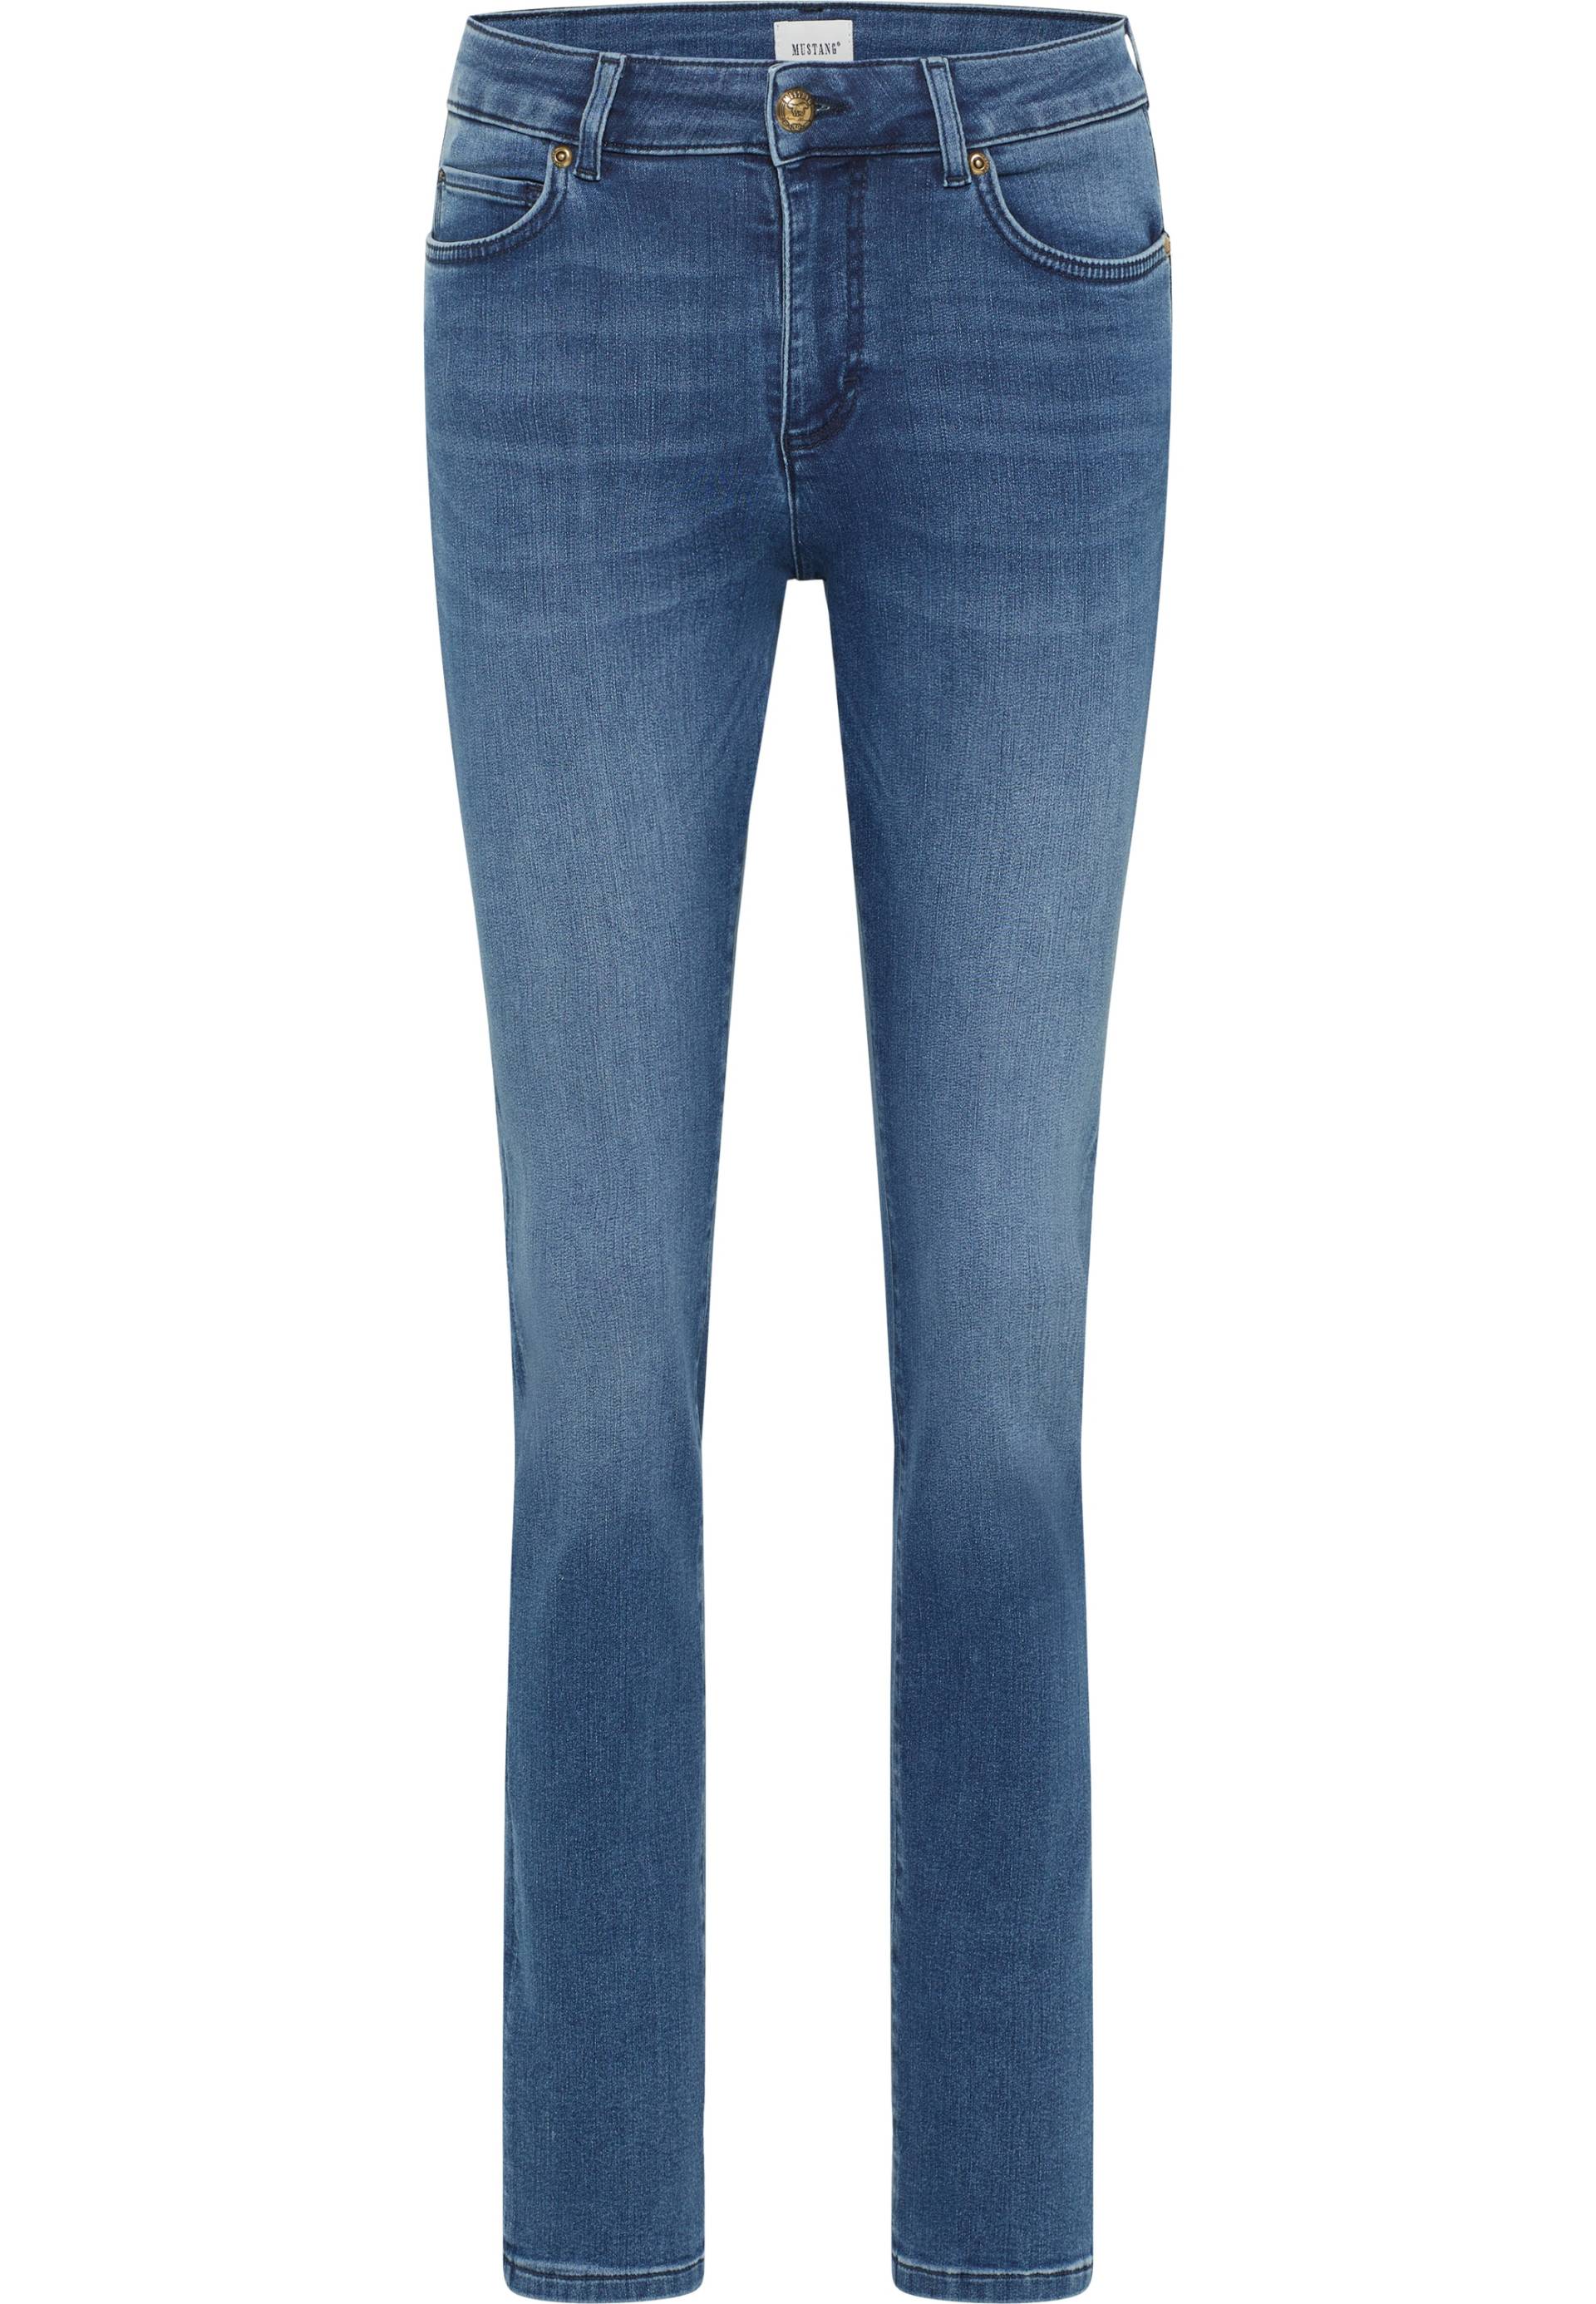 MUSTANG Slim-fit-Jeans »Crosby Relaxed Slim« von Mustang